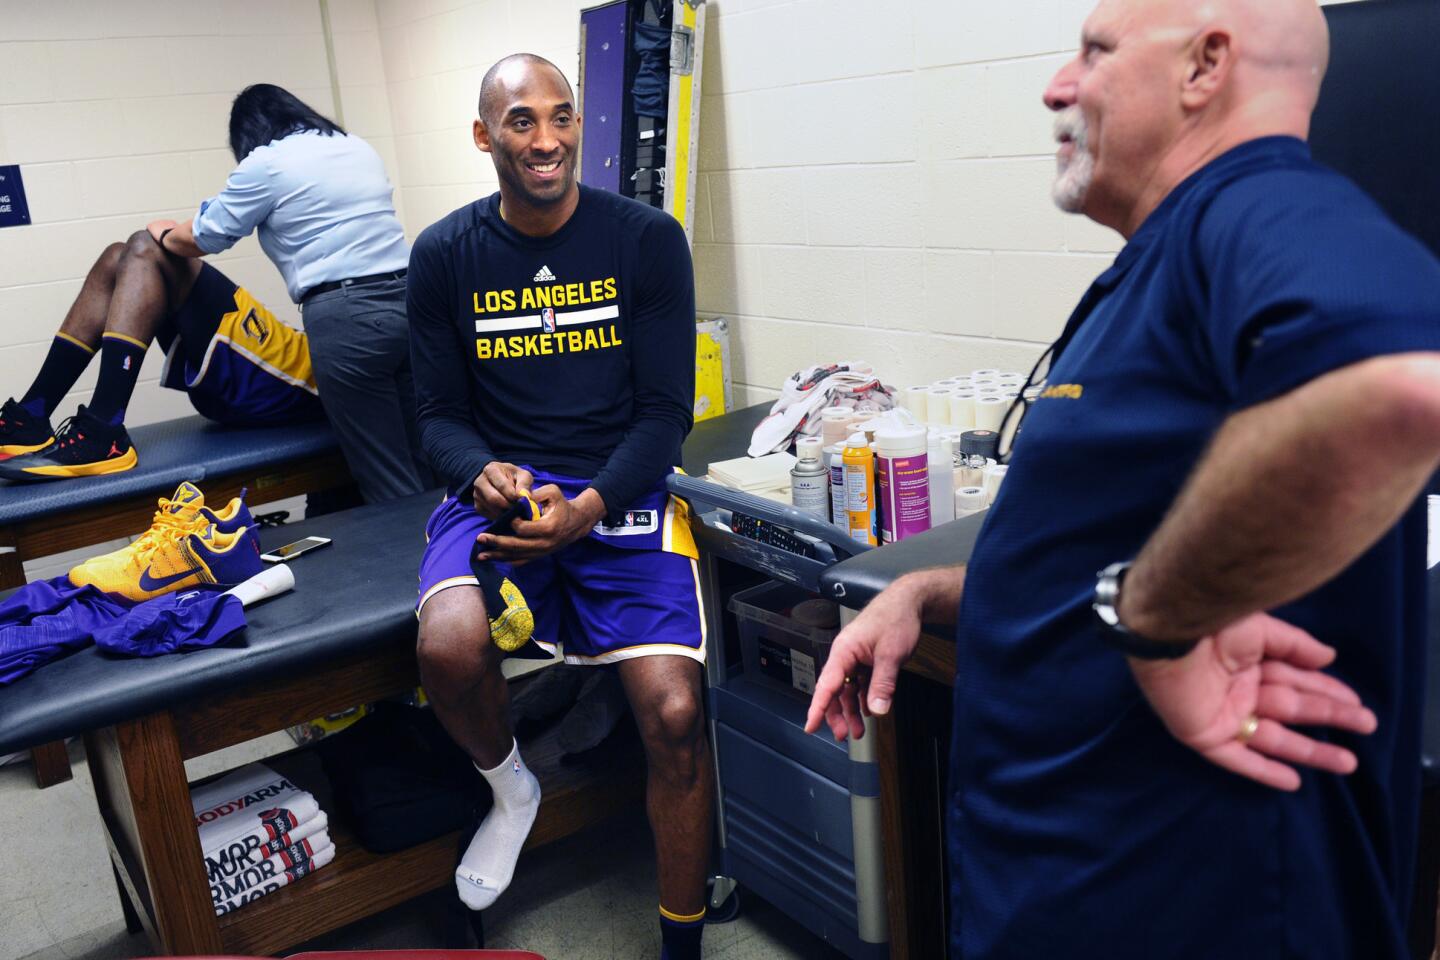 Kobe Bryant and trainer Gary Vitti share a laugh in the locker room before a game against the Rockets in Houston.